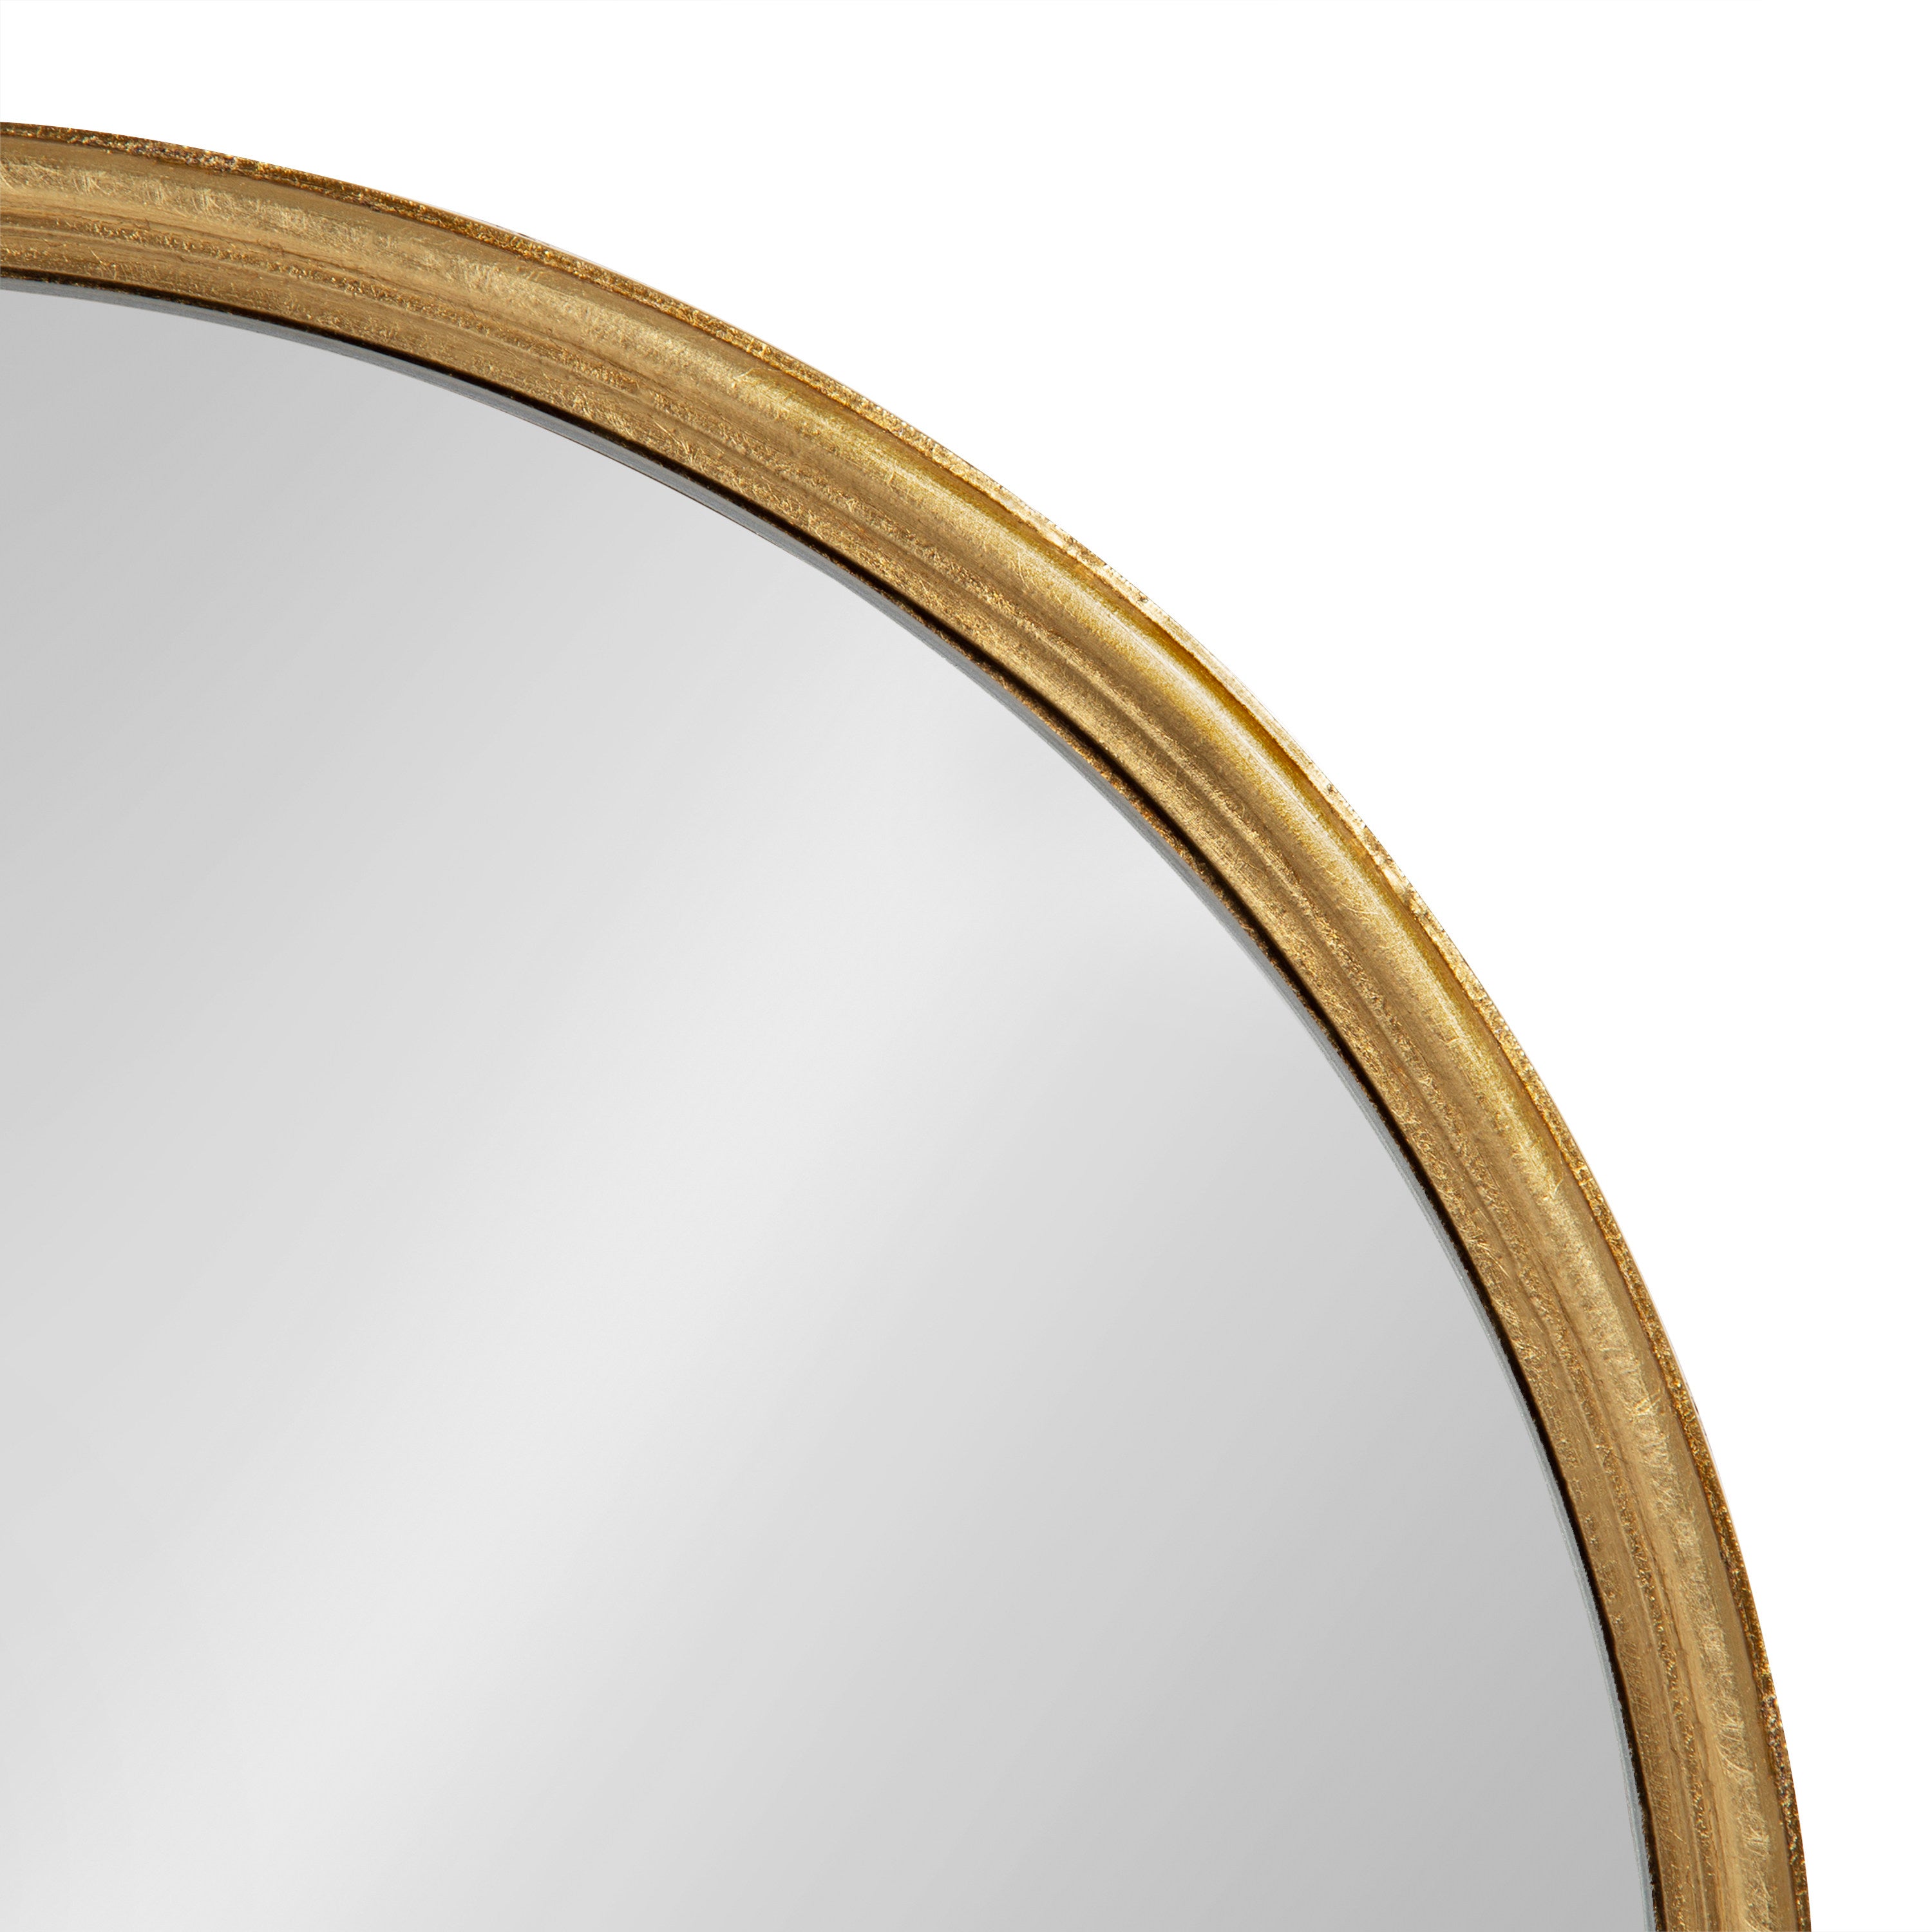 Kate and Laurel Caskill Modern Rounded Capsule Hanging Wall Mirror, 22 x  34, Gold, Glam Round Rectangular Narrow Mirror for Wall – kateandlaurel